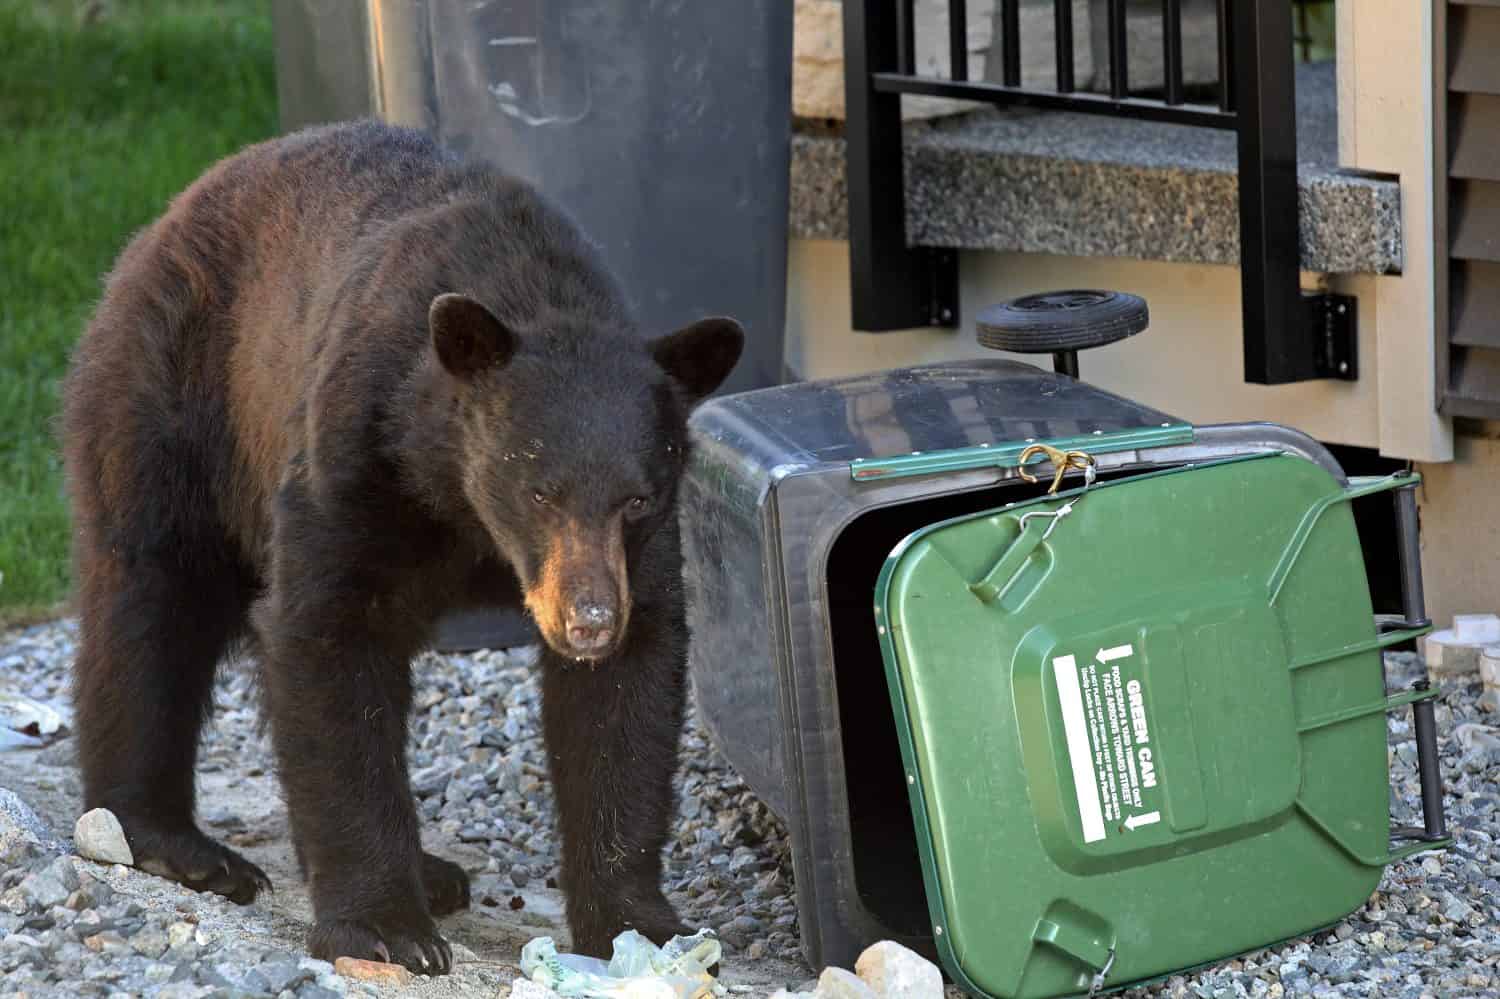 Black bear getting into household garbage on garbage day